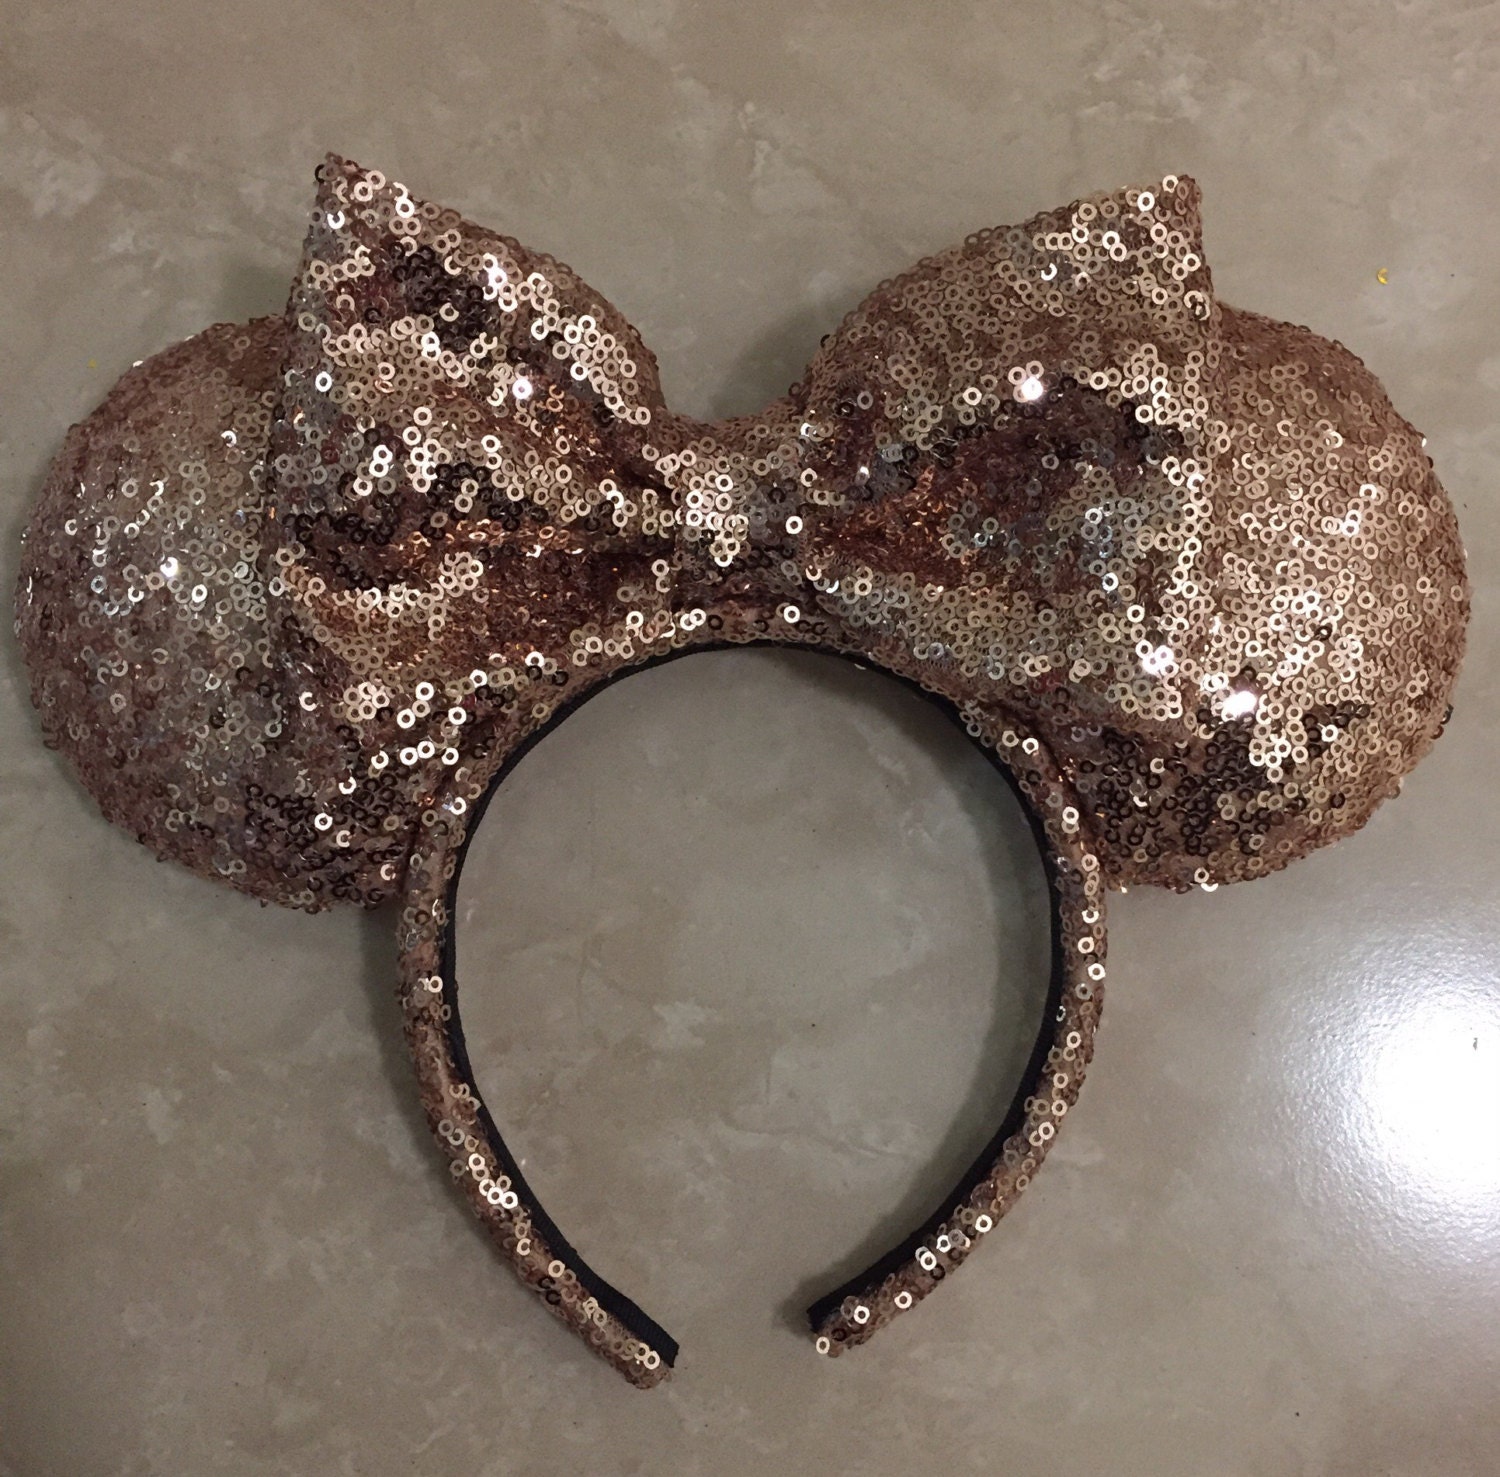 Rose Gold Minnie Ears Ready to SHIP 5-7 days